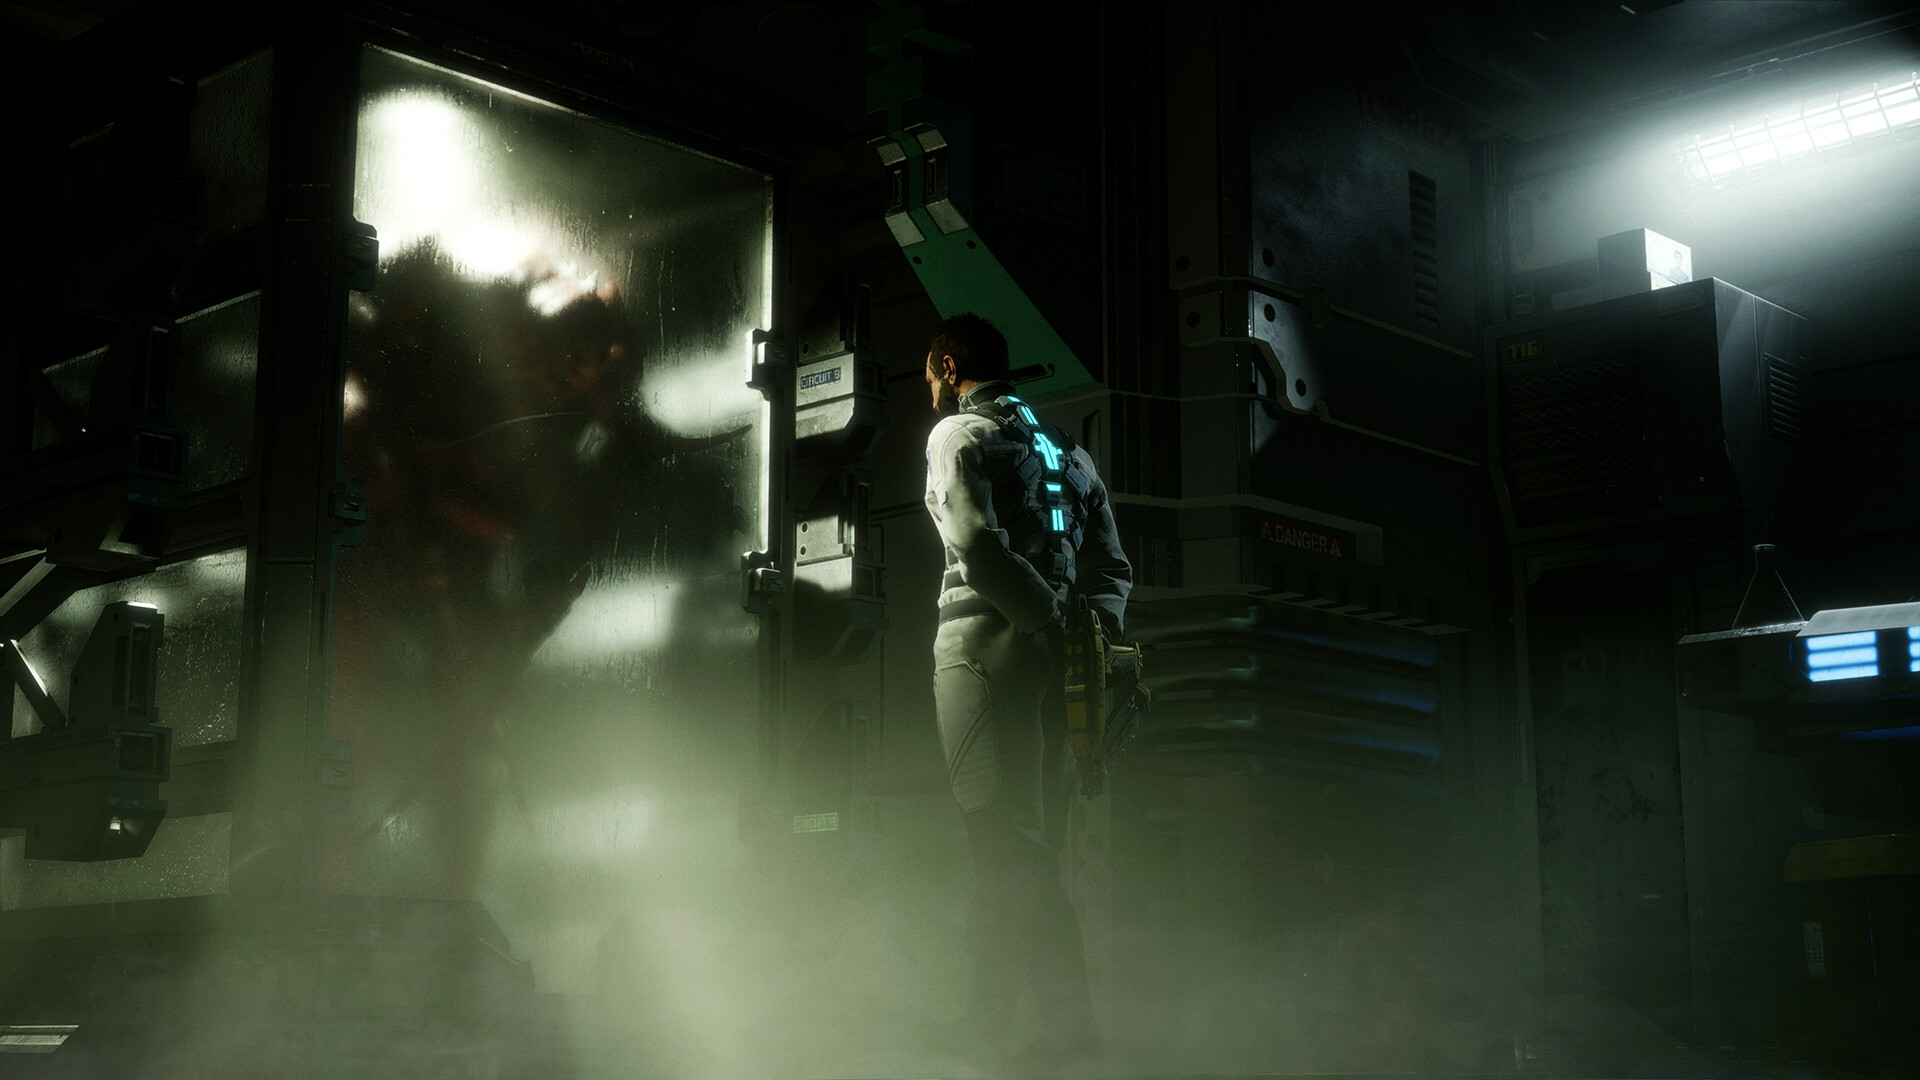 Steam now offering timed trials for games, starting with Dead Space